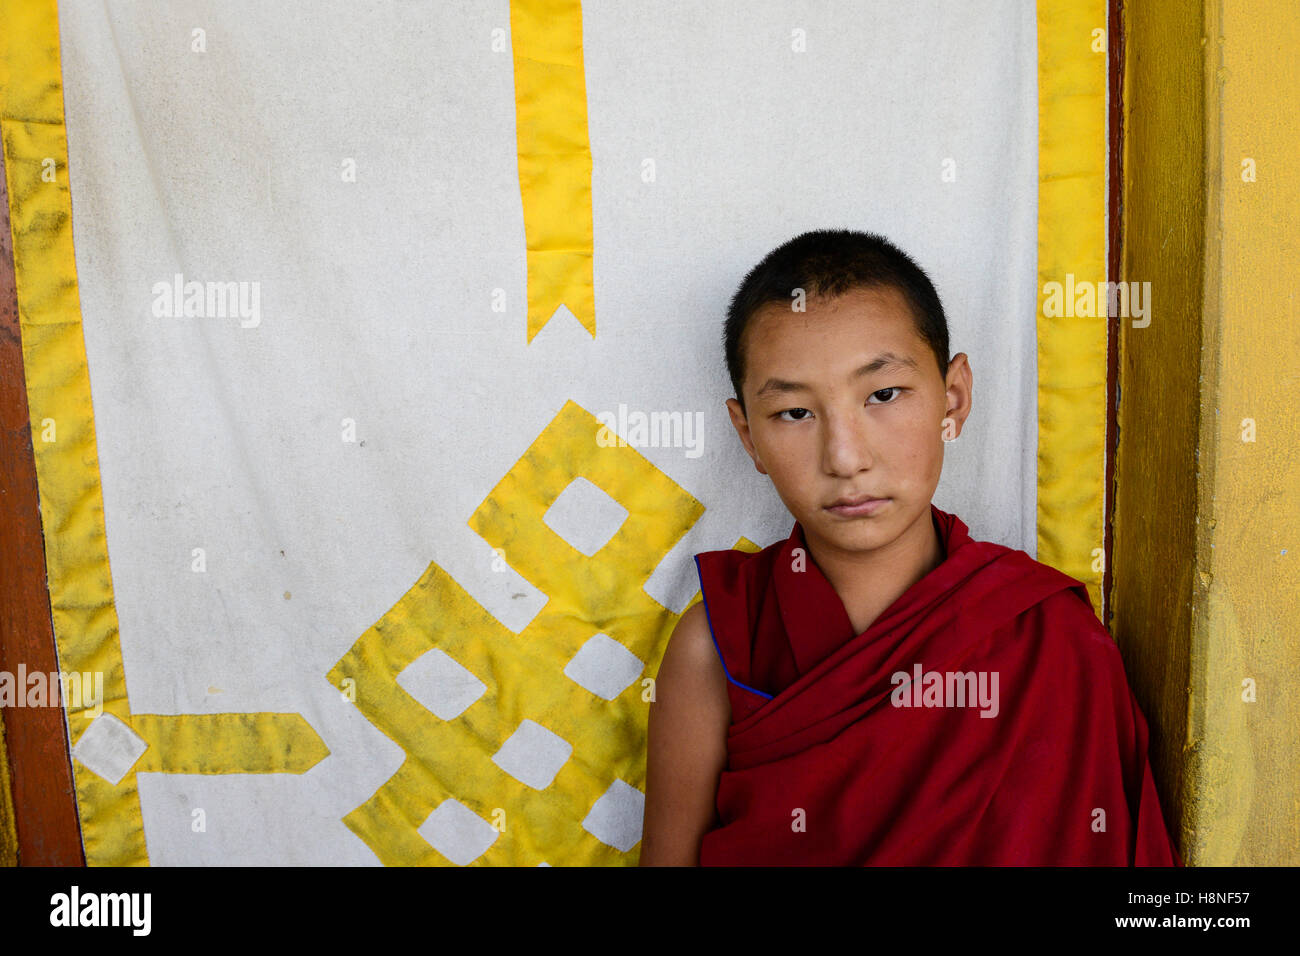 NEPAL Pokhara, tibetan refugee camp Tashi Ling, Shri Gaden Dhargyaling Monastery, young novice Lobsang Ngawang is 11 years old and belongs to a tibetan nomad family in Upper Mustang, background curtain with endless knot a symbol for luck in tibetan culture Stock Photo